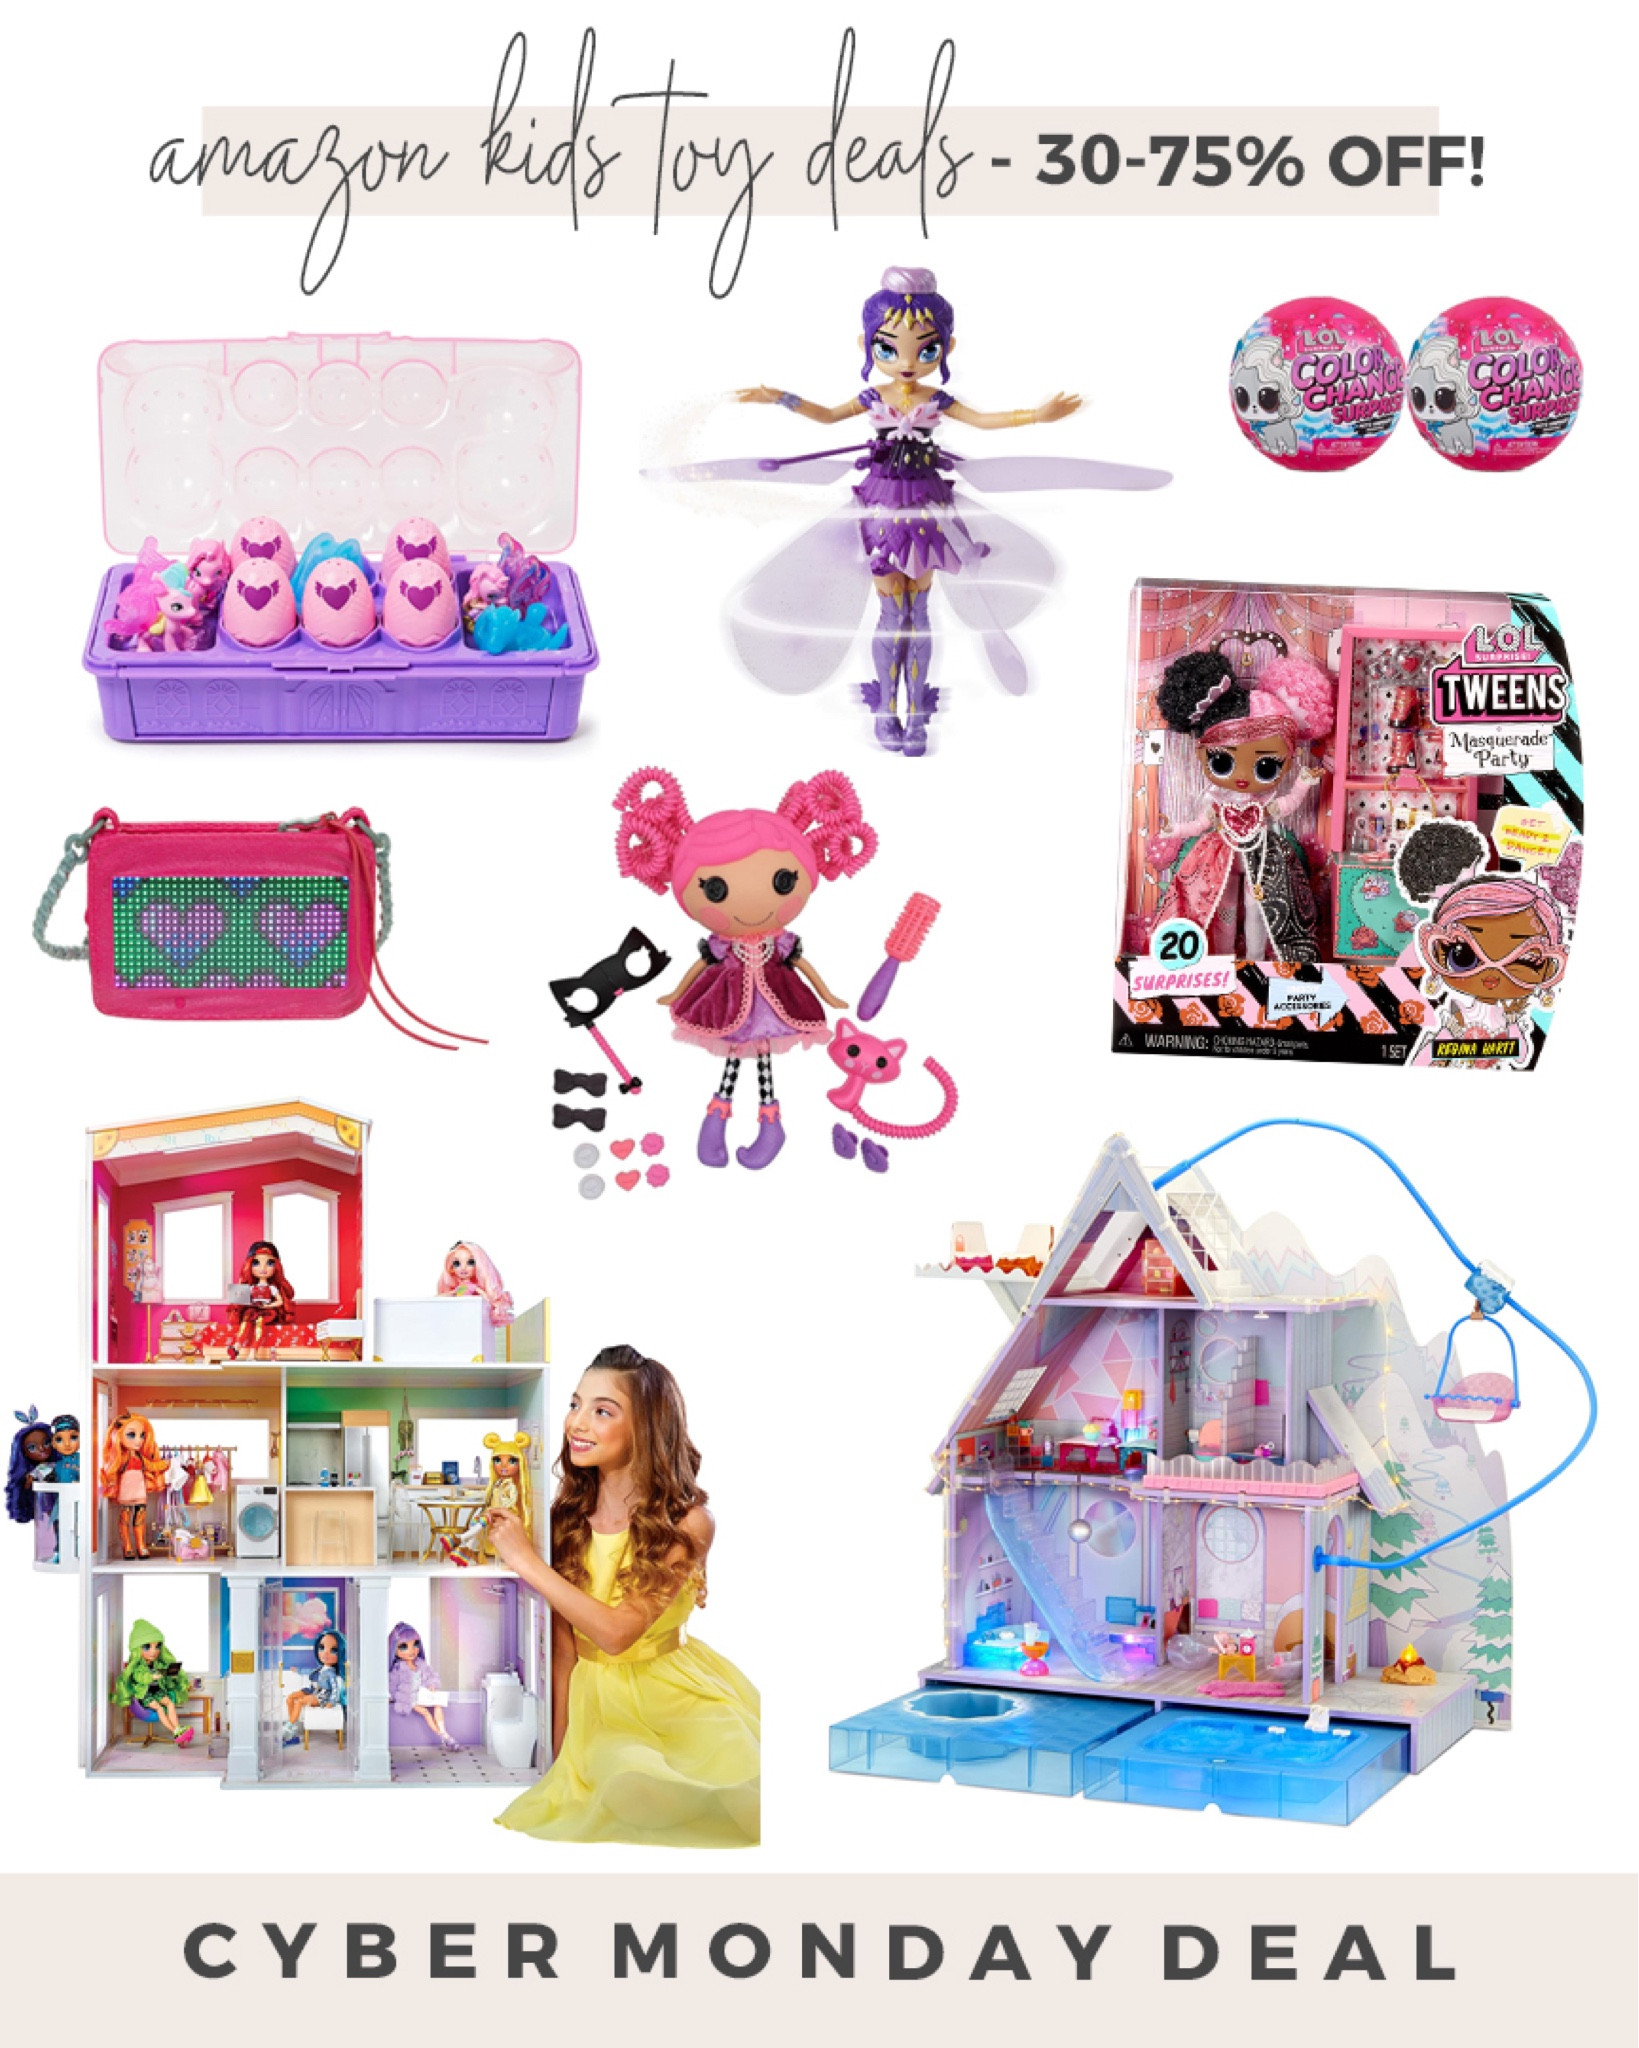 LOL Surprise! Tweens Masquerade Party Regina Hartt Fashion Doll with 20  Surprises Including Accessories & 2 Pink Outfits, Holiday Toy Playset,  Great